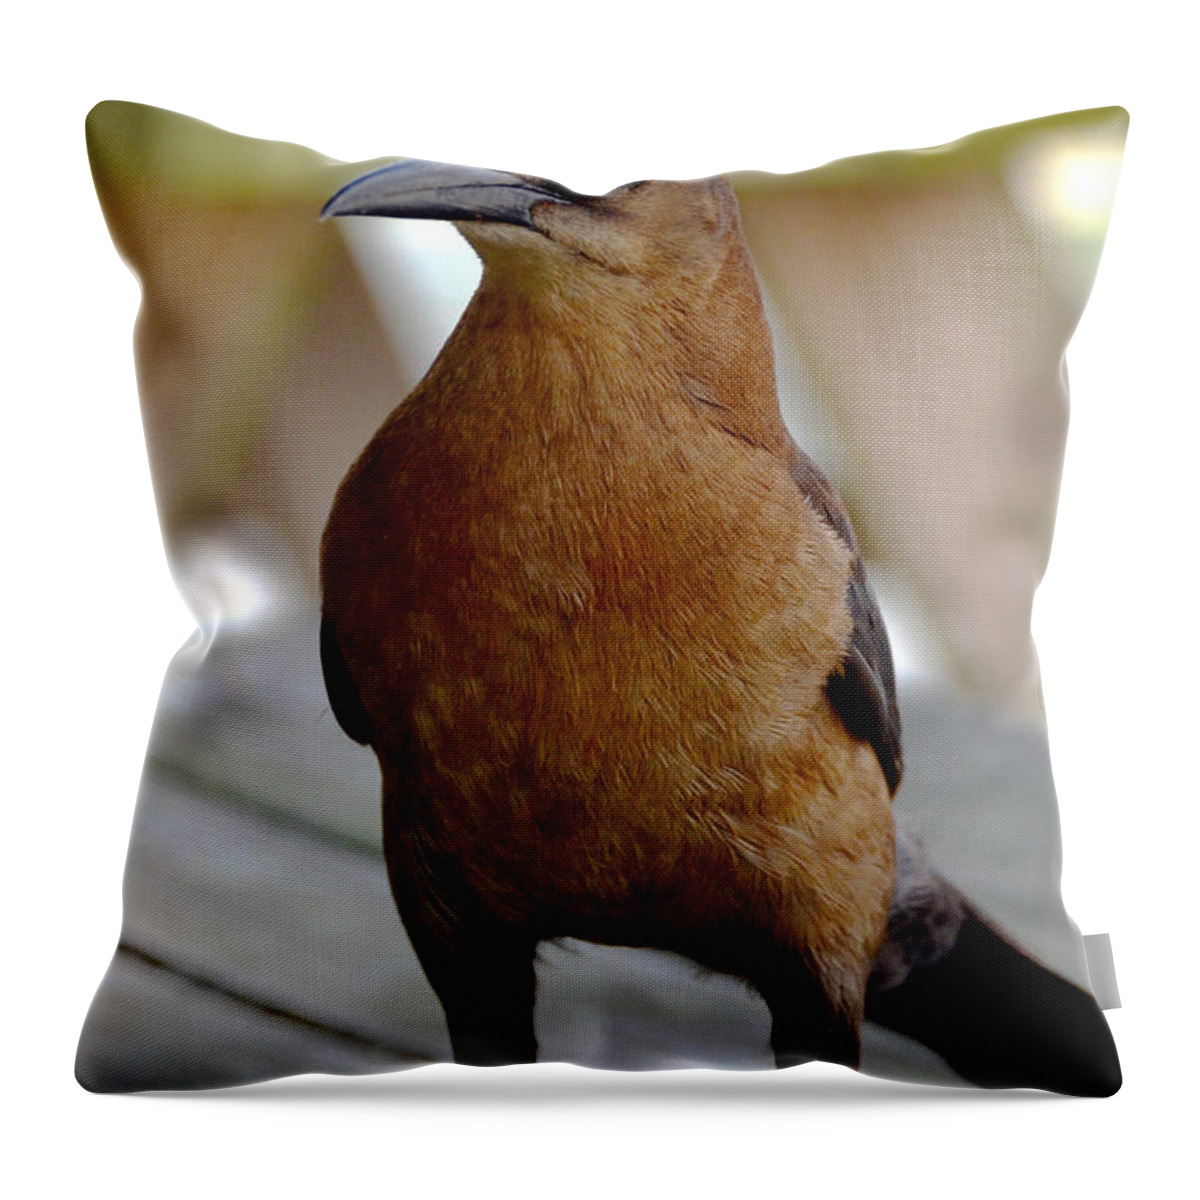 Birds Throw Pillow featuring the photograph Grackle by Pravine Chester